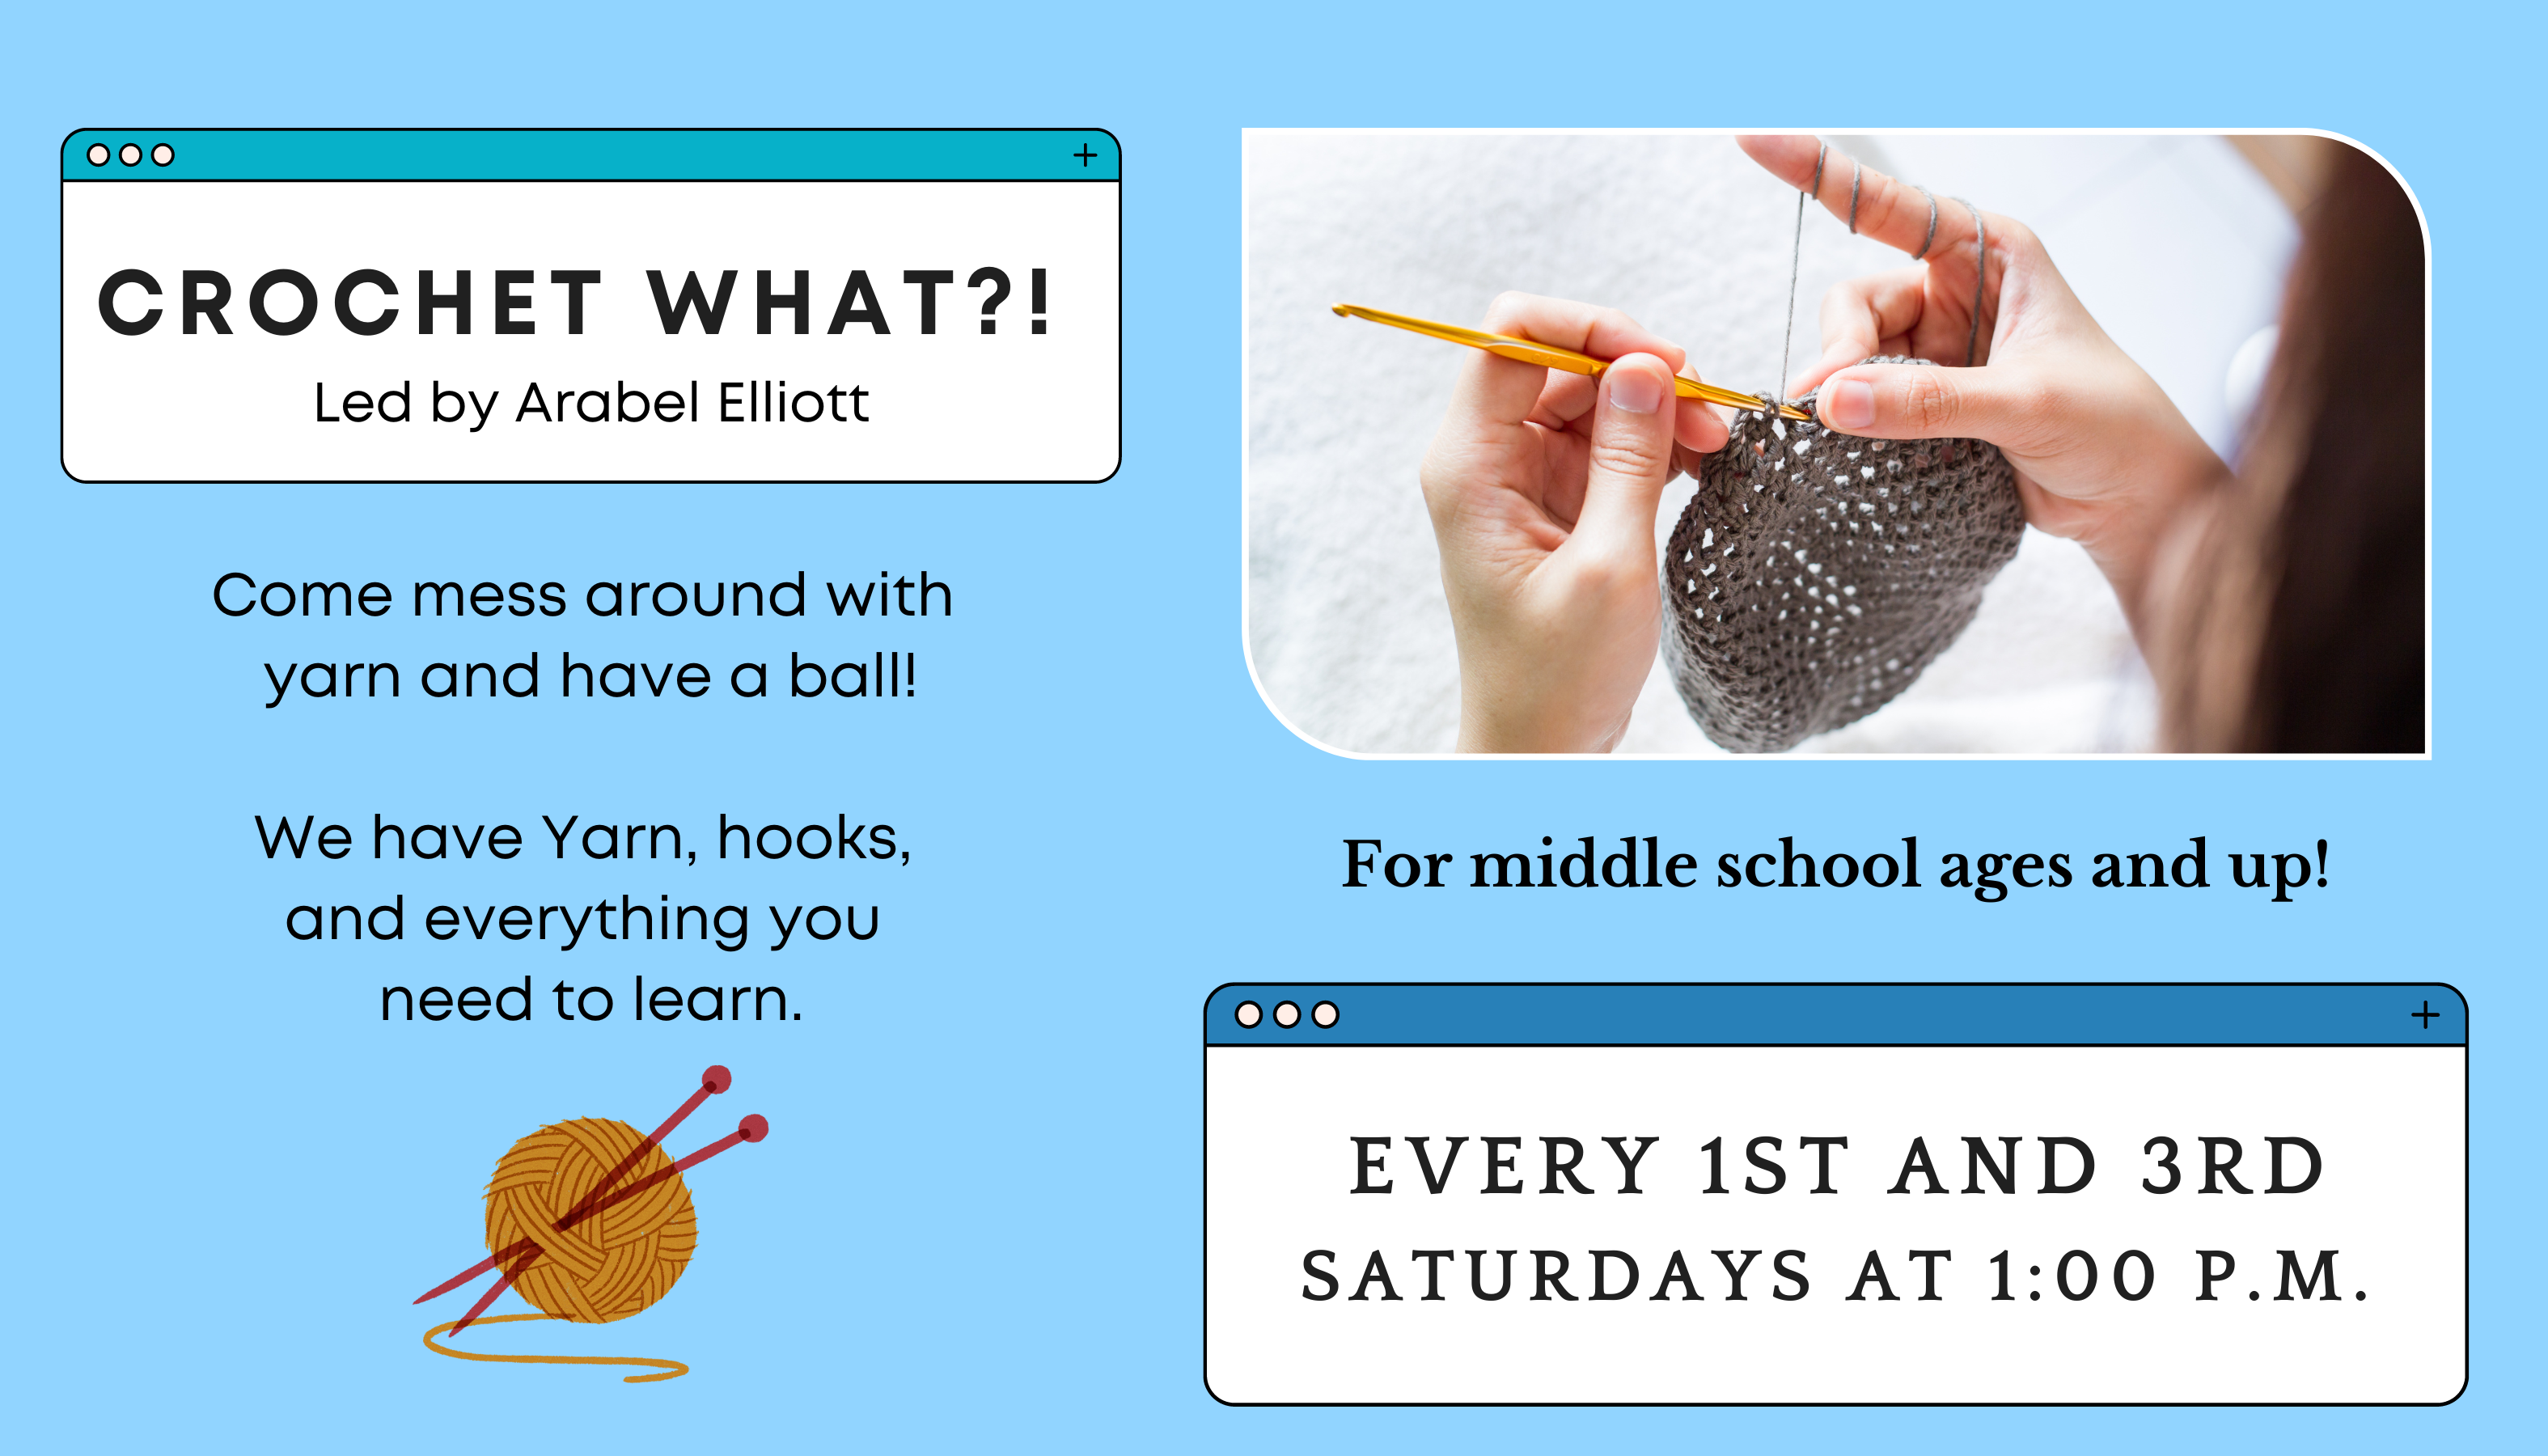 Join us for Crochet What?! every 1st and 3rd Saturday!